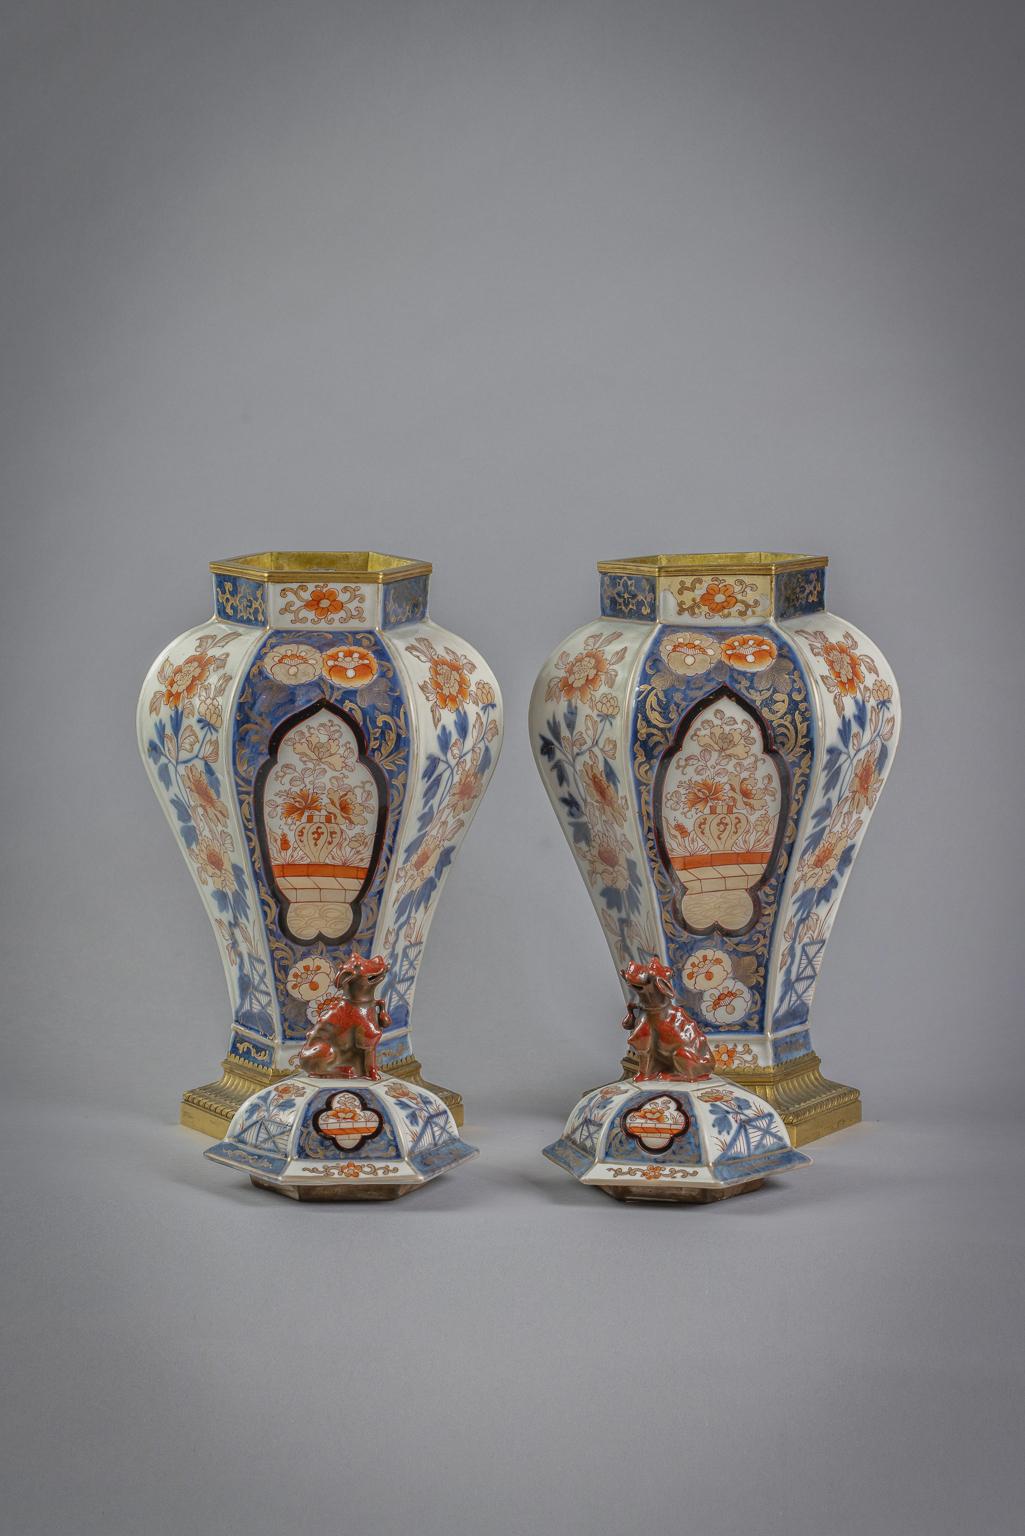 Pair of Bronze Mounted French Porcelain Covered Hexagonal Vases, Circa 1875 In Good Condition For Sale In New York, NY